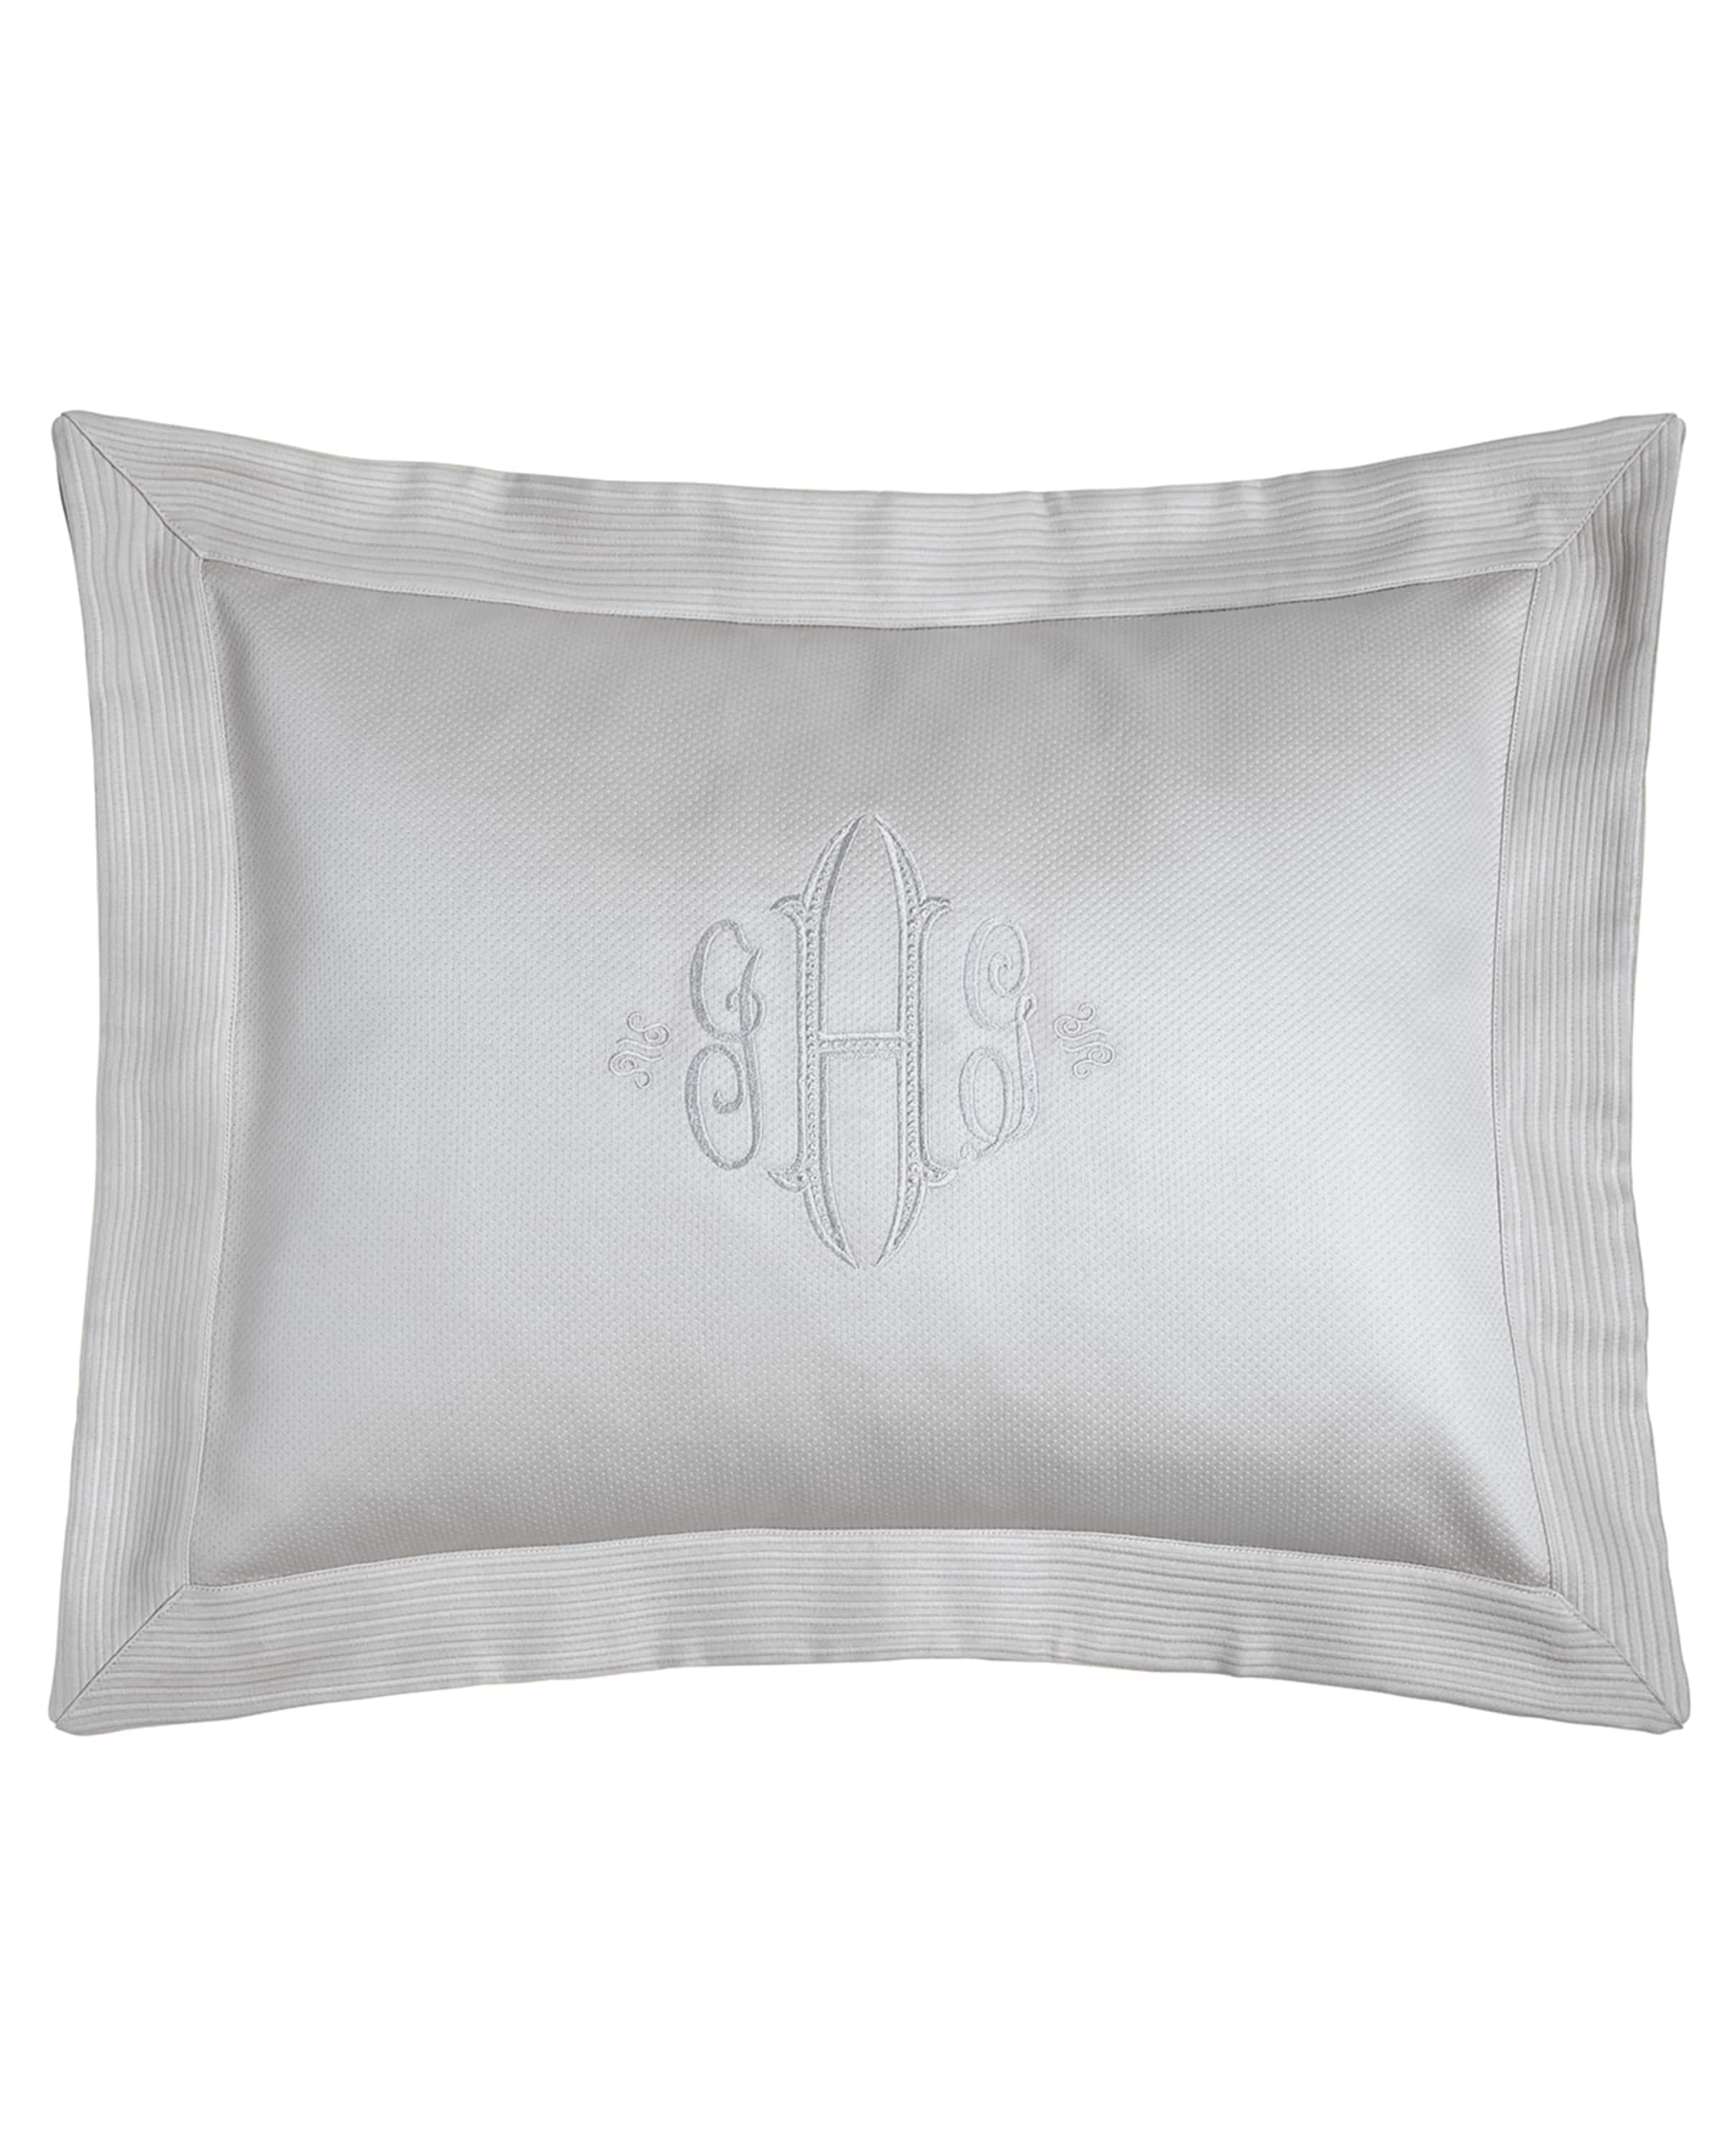 Peacock Alley King Angelina Pique Sham with Script Monogram